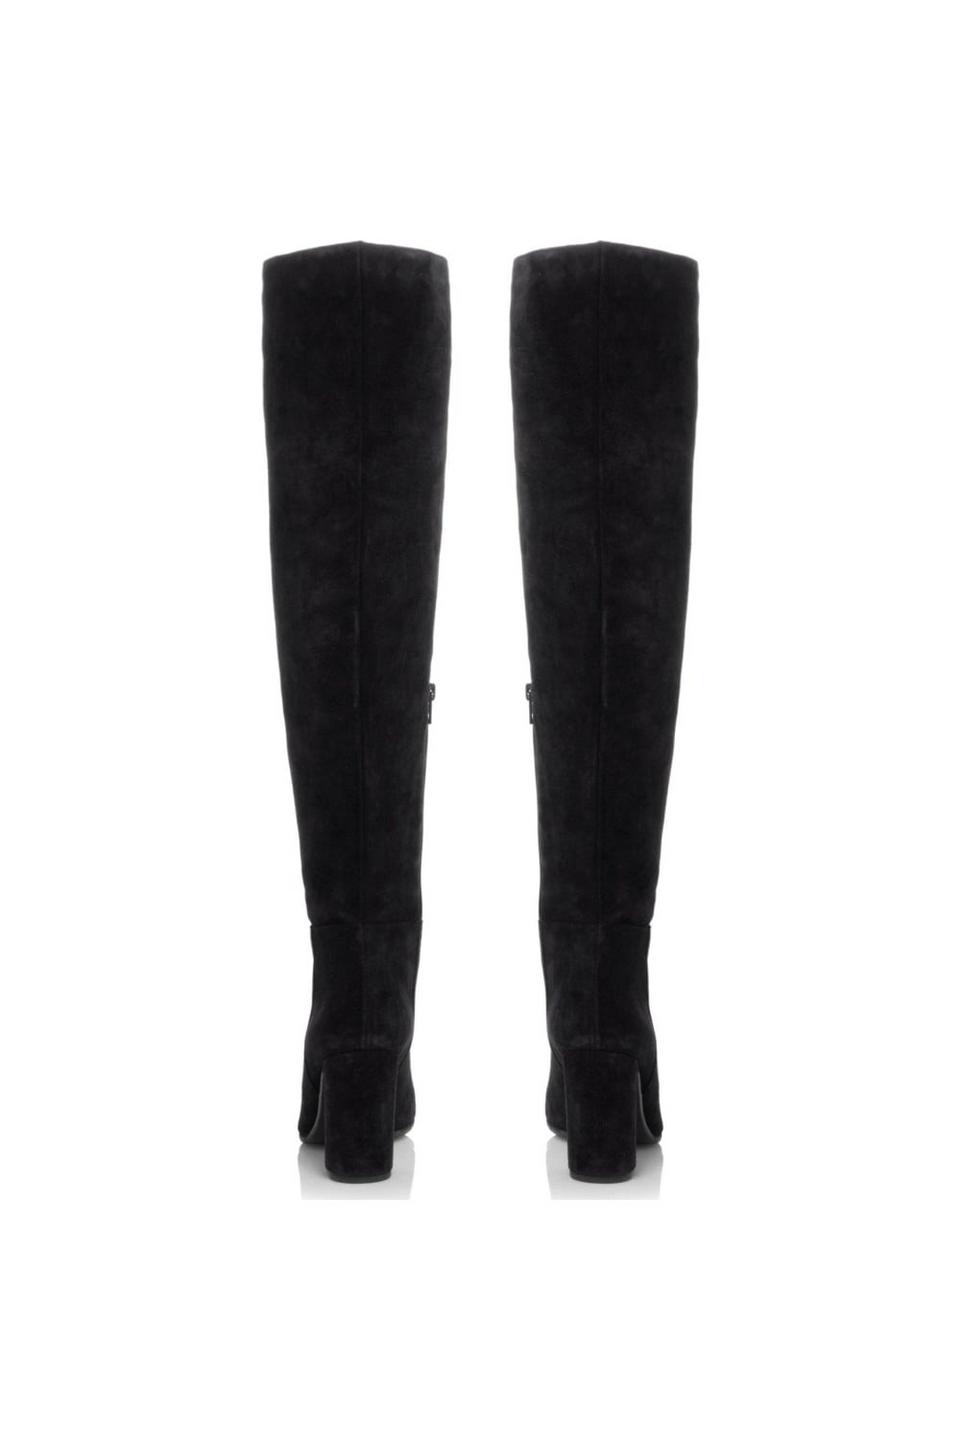 Boots | 'Selsie' Suede Knee High Boots | Dune London